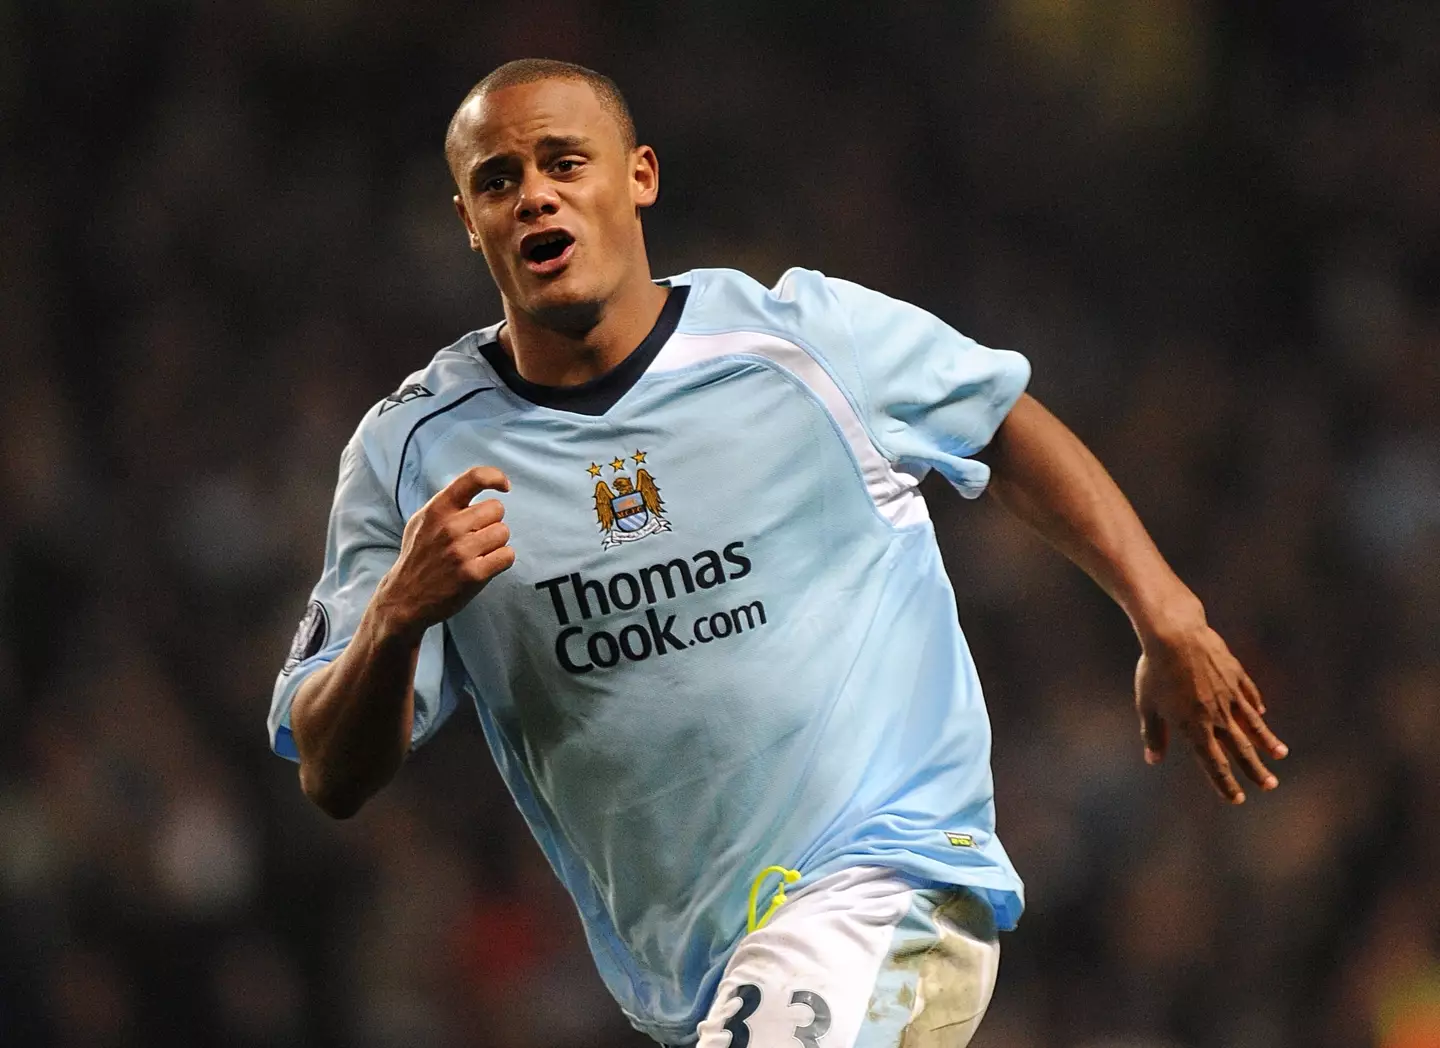 Vincent Kompany was a midfielder when the two sides first met. Image: PA Images